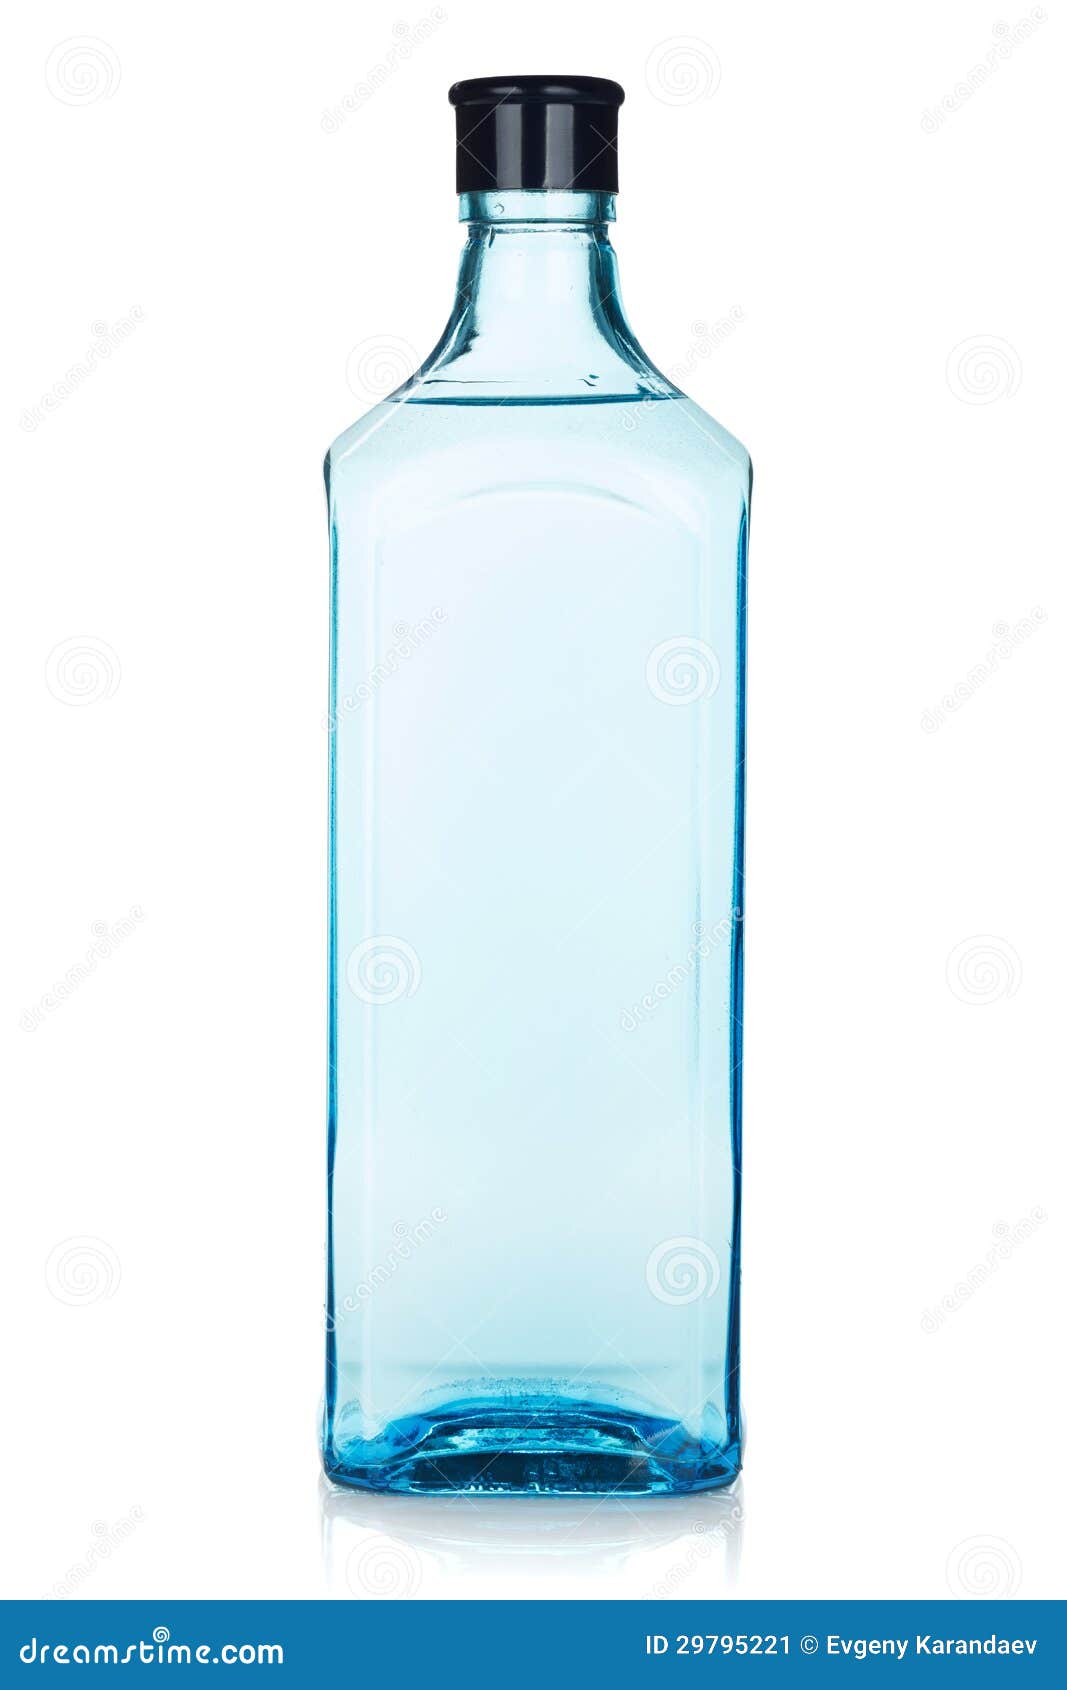 Download 5 260 Gin Bottle Photos Free Royalty Free Stock Photos From Dreamstime Yellowimages Mockups